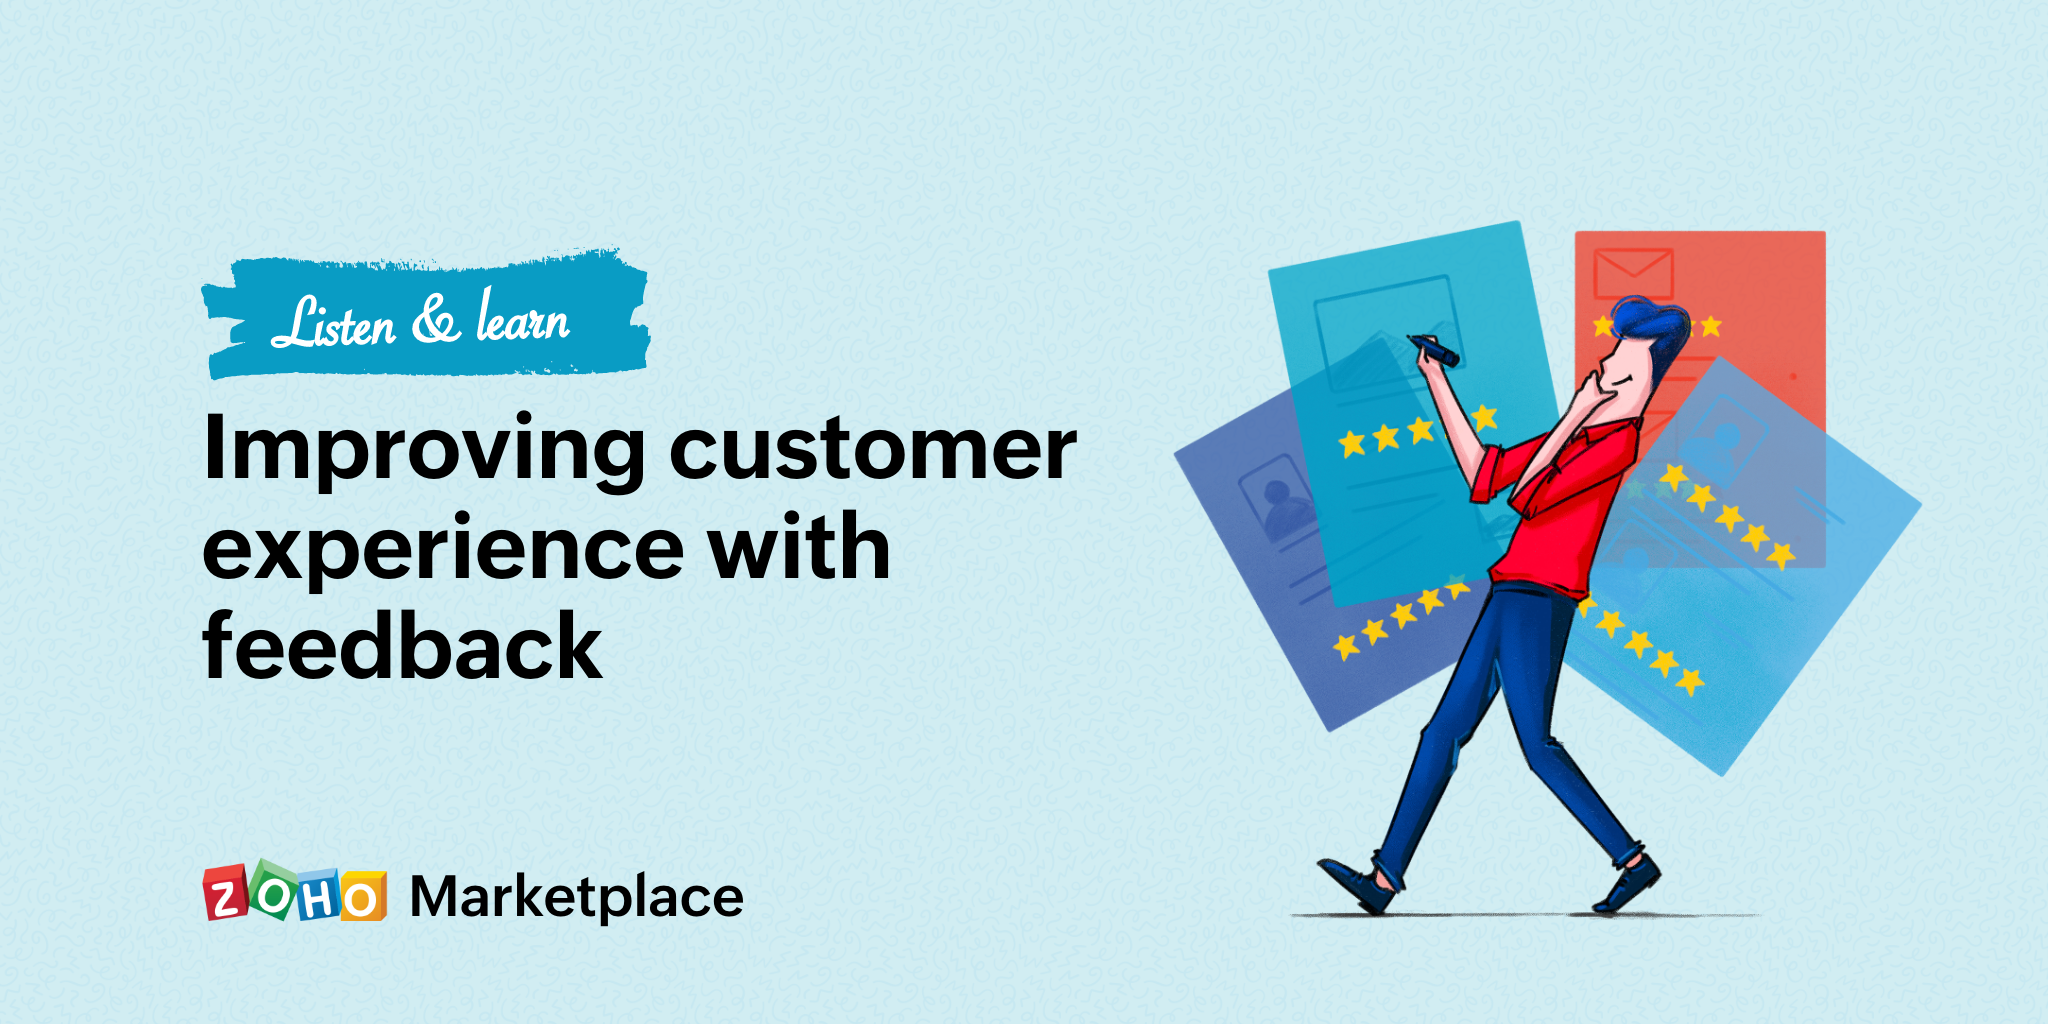 Listen and learn: Improving customer experience with feedback